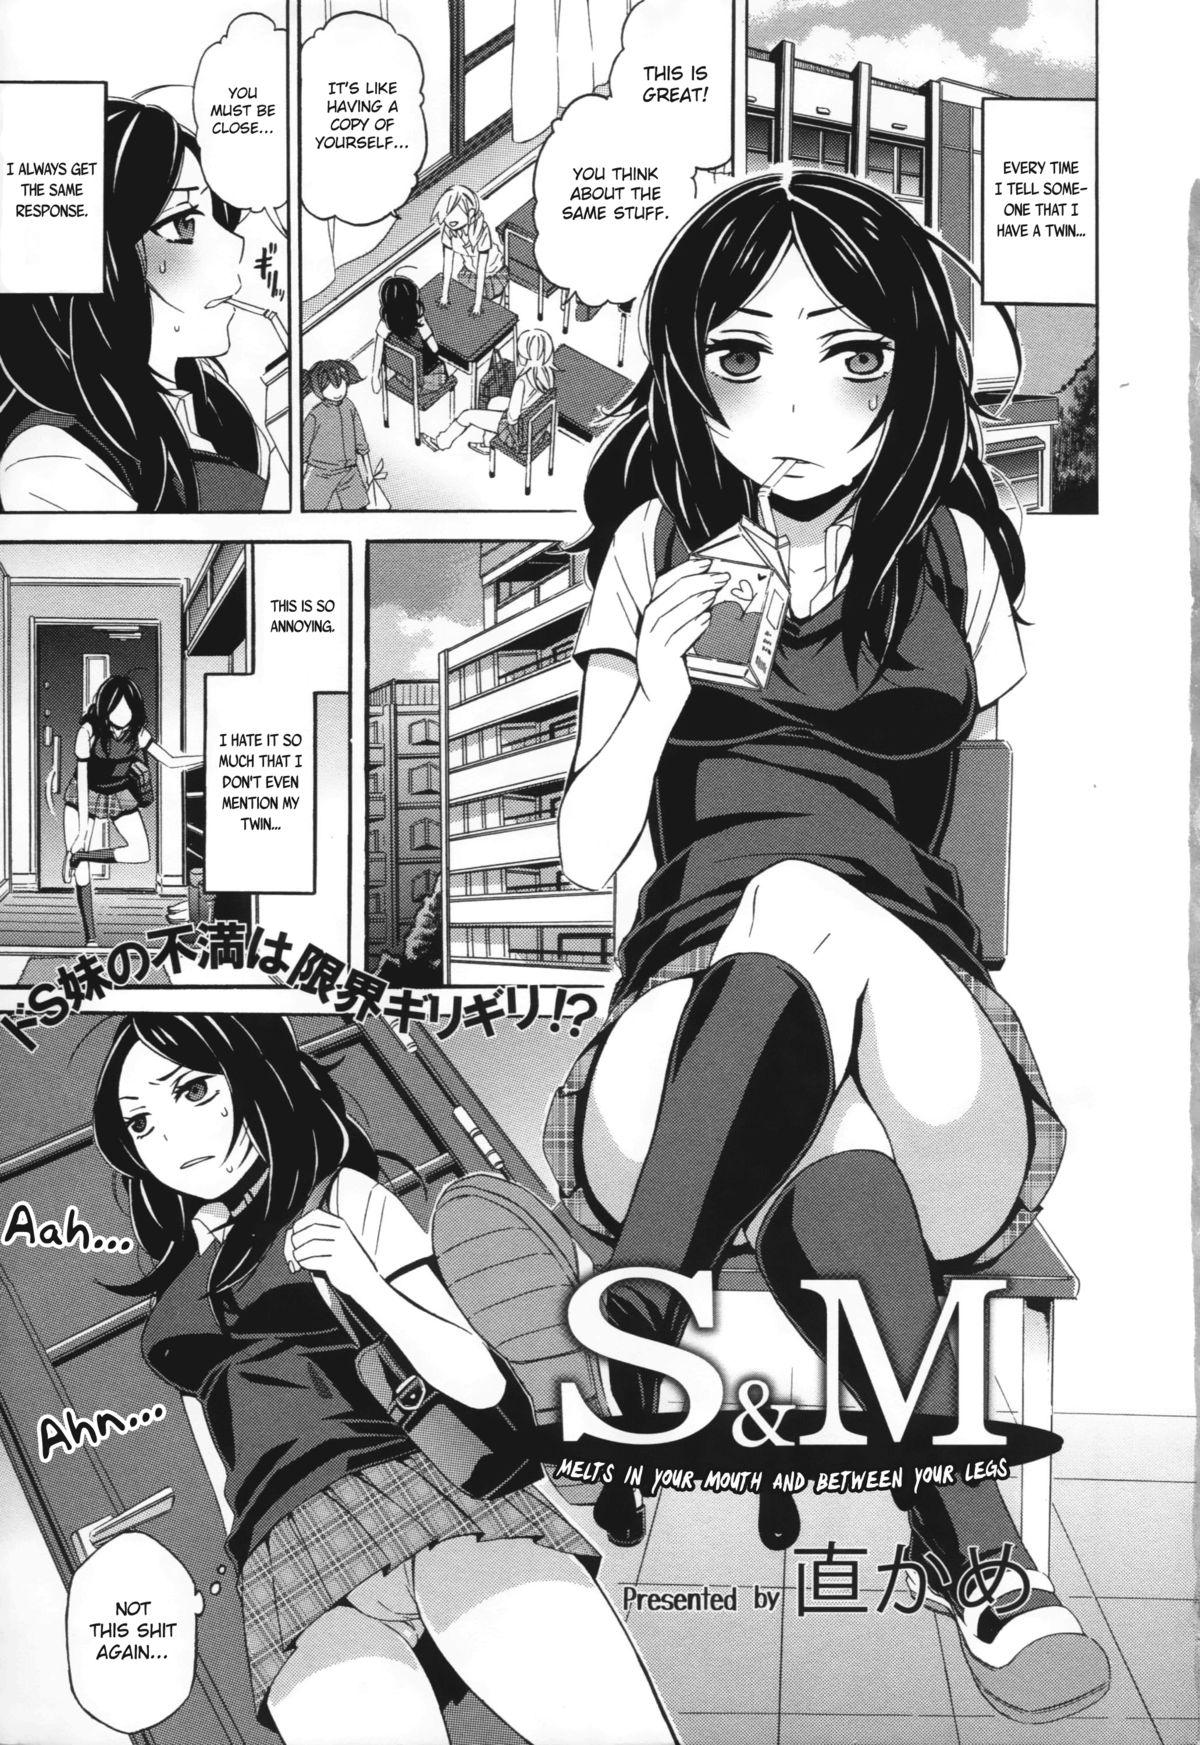 Couple Sex [Naokame] S&M ~Okuchi de Tokete Asoko demo Tokeru~ | S&M ~Melts in Your Mouth and Between Your Legs~ (COMIC L.Q.M ~Little Queen Mount~ Vol. 1) [English] [MintVoid] Black Hair - Picture 1